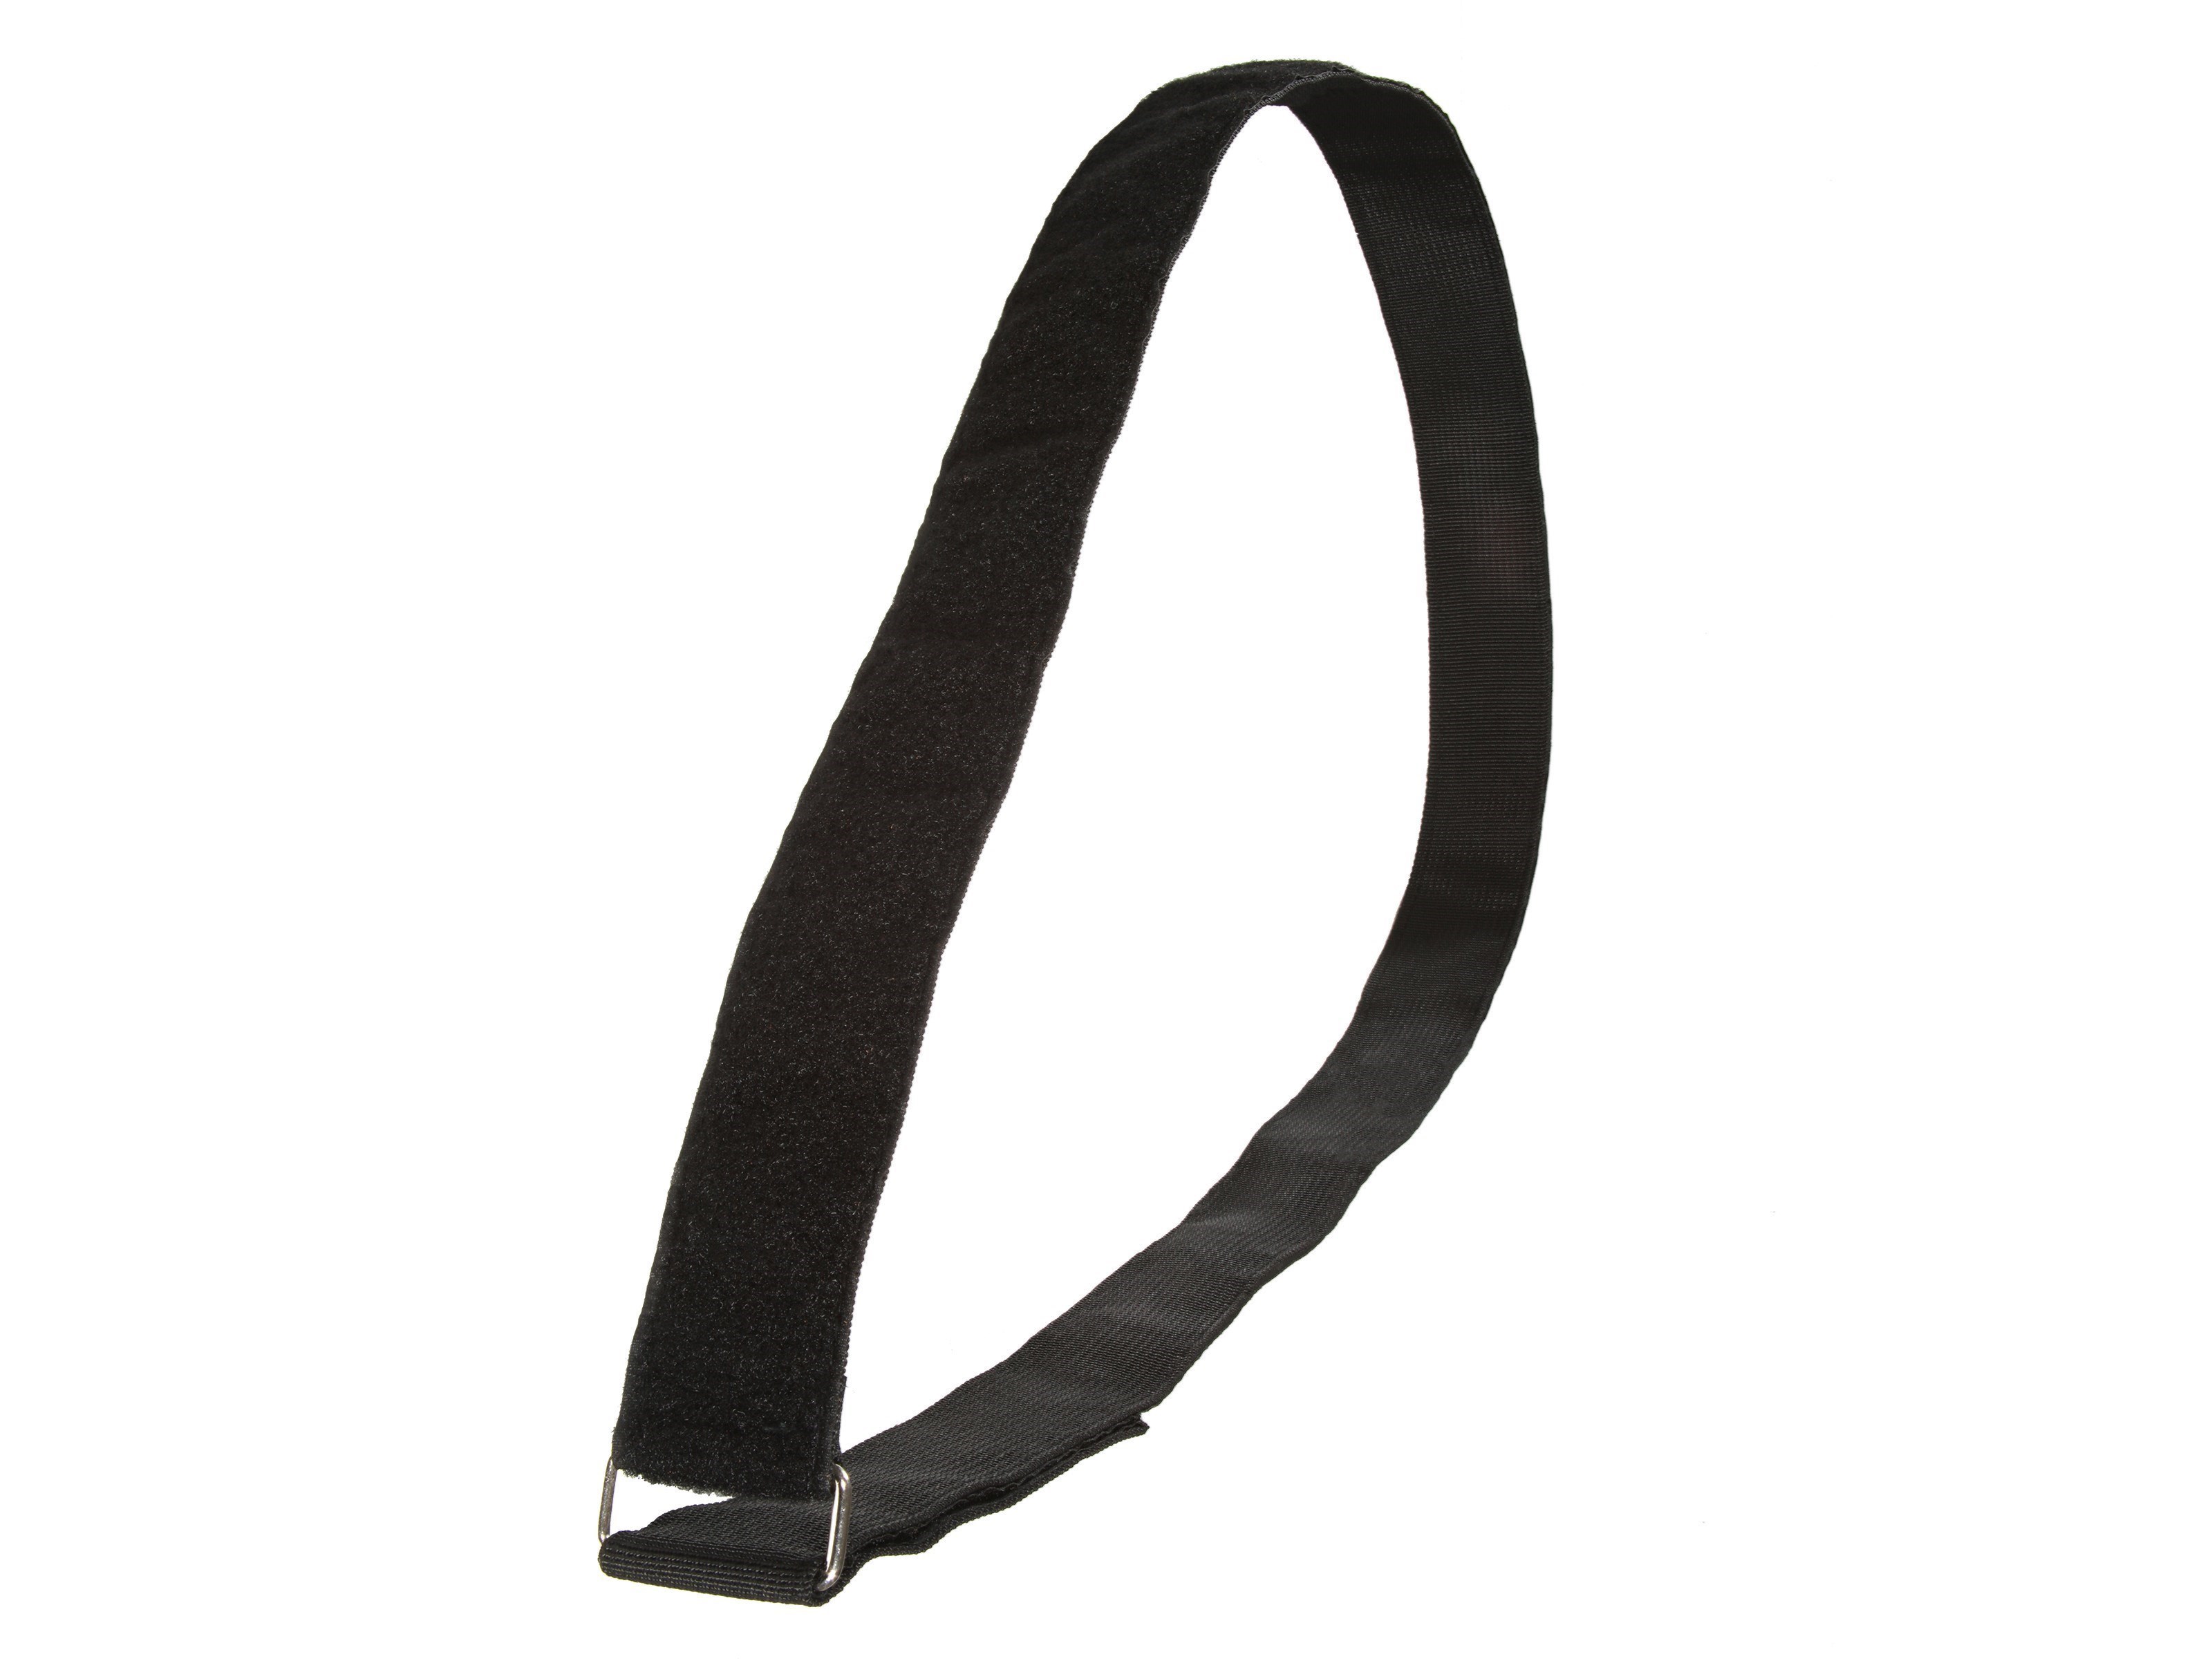 84 x 3 Inch Heavy-Duty Black Cinch Strap - 2 Pack - Secure™ Cable Ties